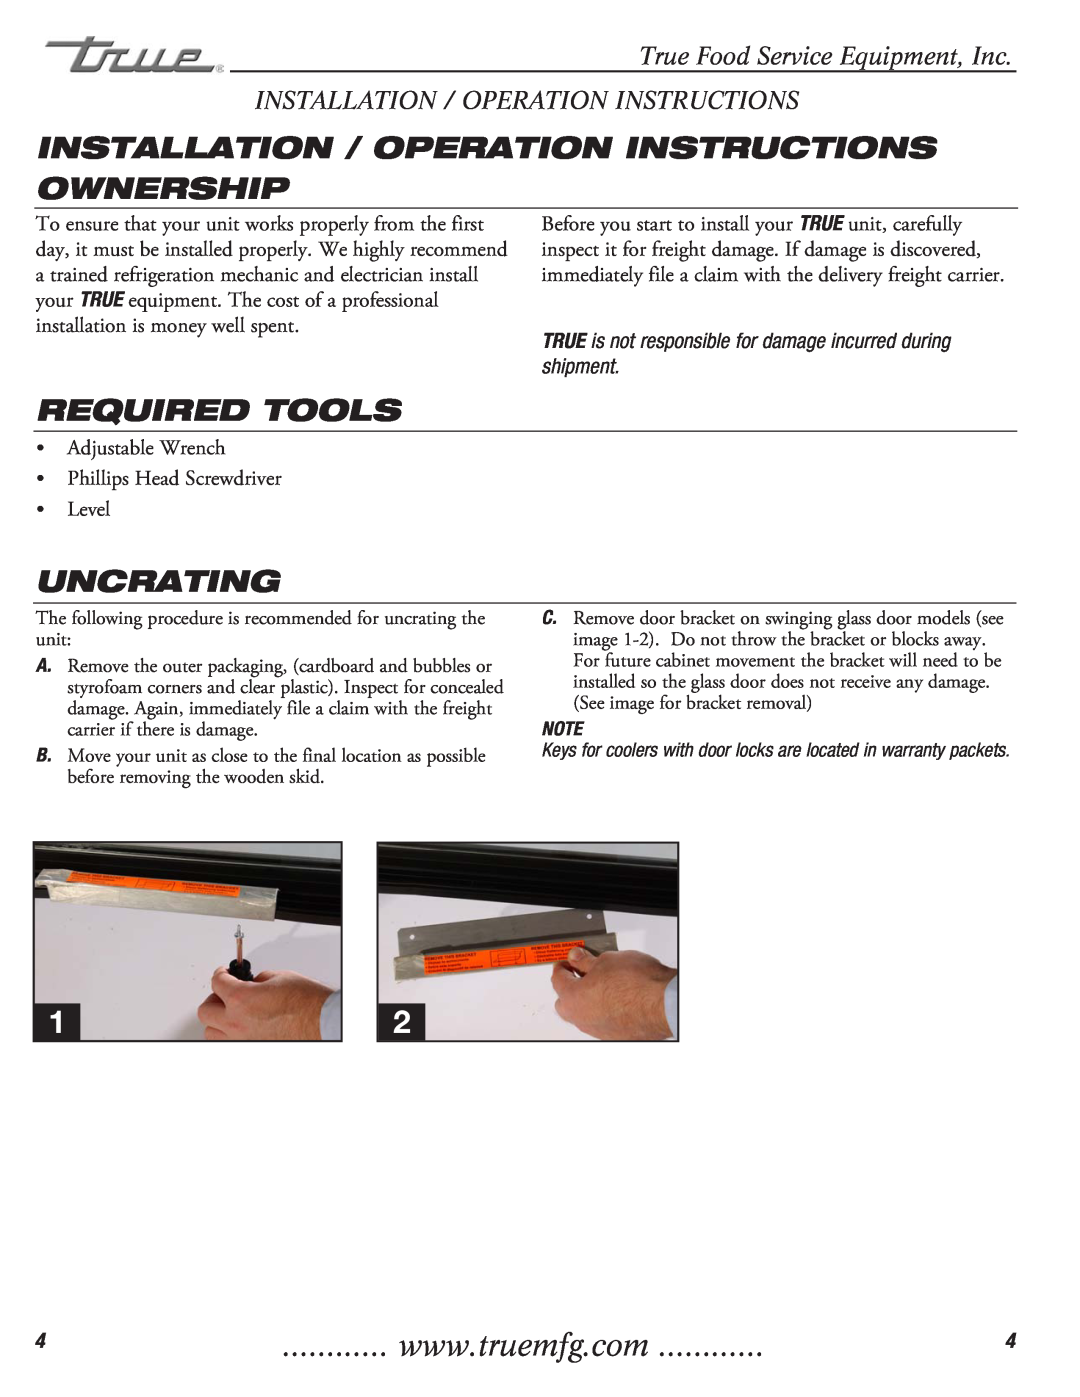 True Manufacturing Company T-23DT Installation / Operation Instructions Ownership, Required Tools, Uncrating 